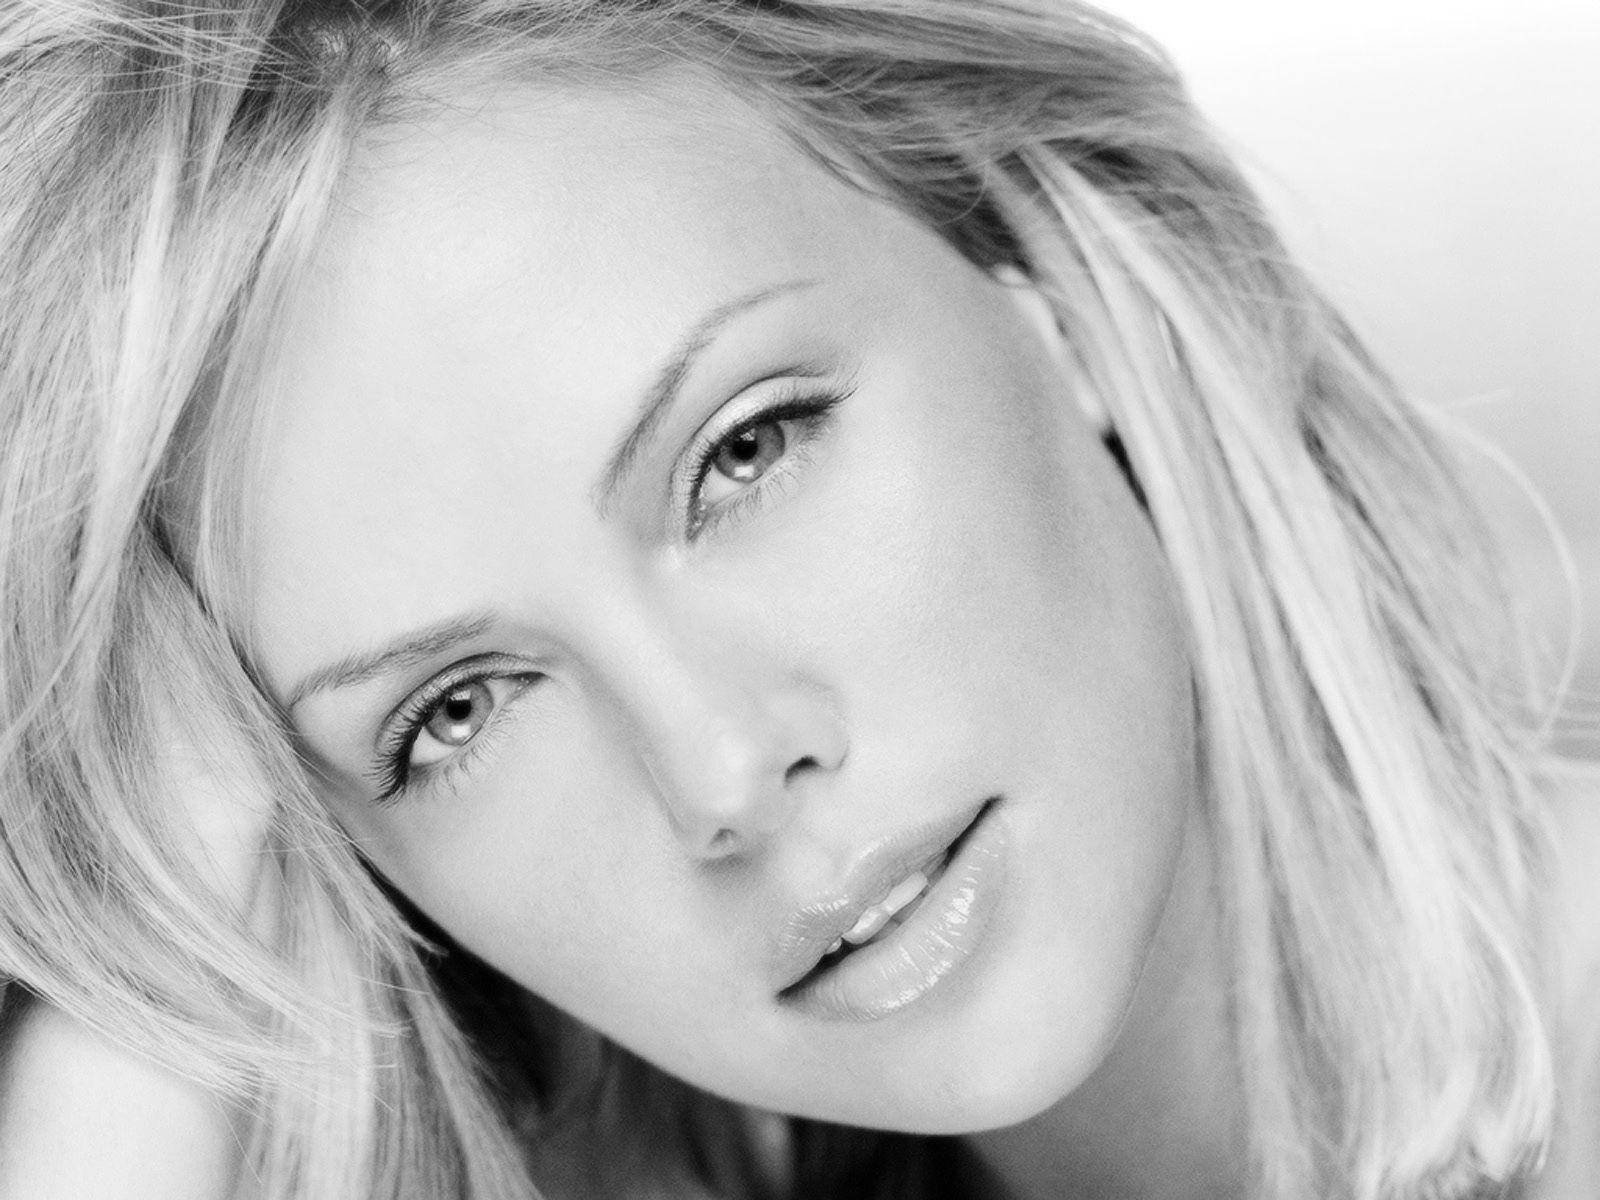 Charlize Theron: An Iconic Actress Background